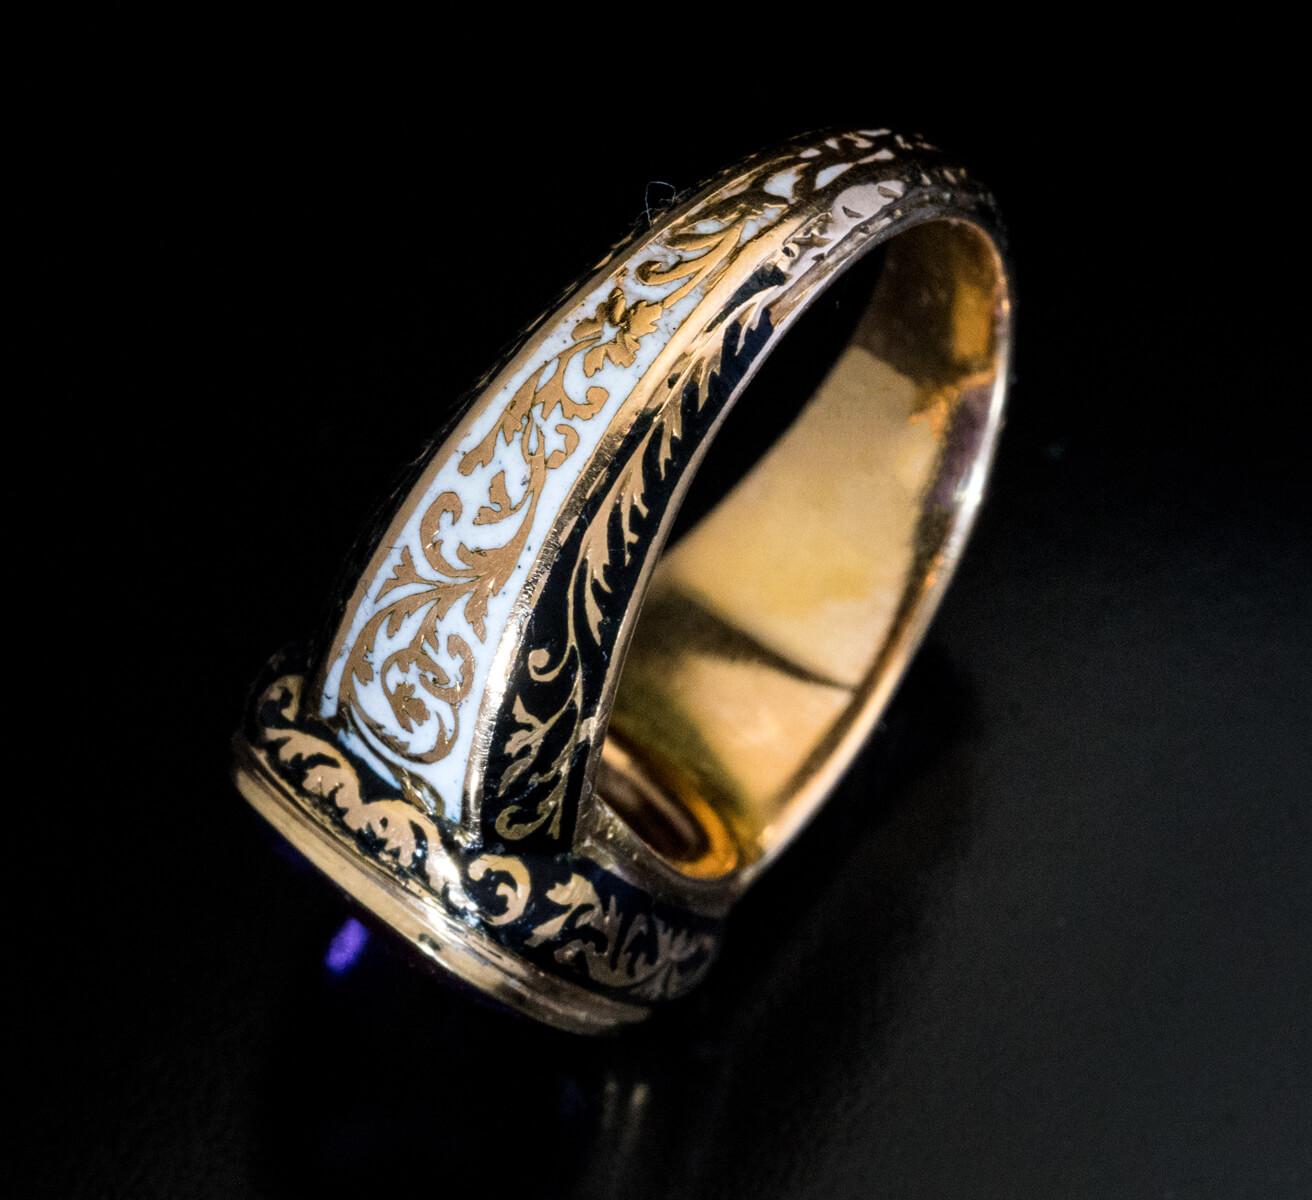 Circa 1830s

This late Georgian – early Victorian era heavy 18K gold ring features a very fine champleve enamel work in medieval / renaissance taste. The ring is bezel set with a cushion shape flat cut amethyst (13.3 x 10.7 x 5.8 mm) of a medium